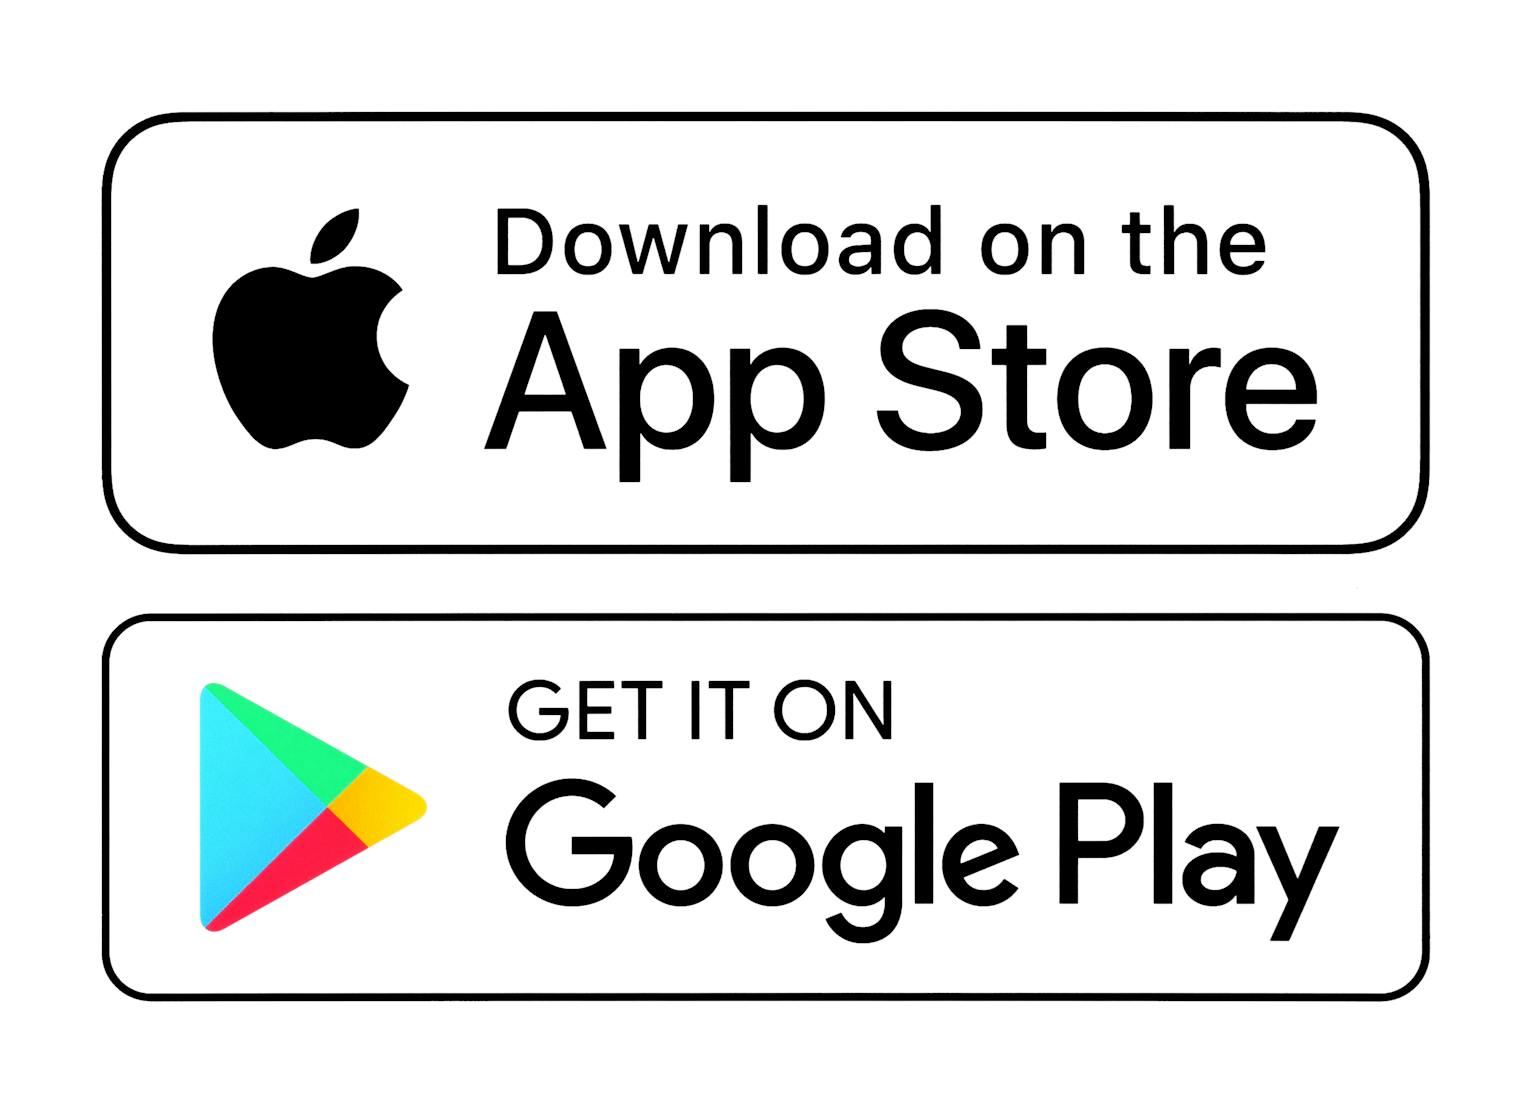 Find out how to get your app on the app store with this useful guide from AppMachine